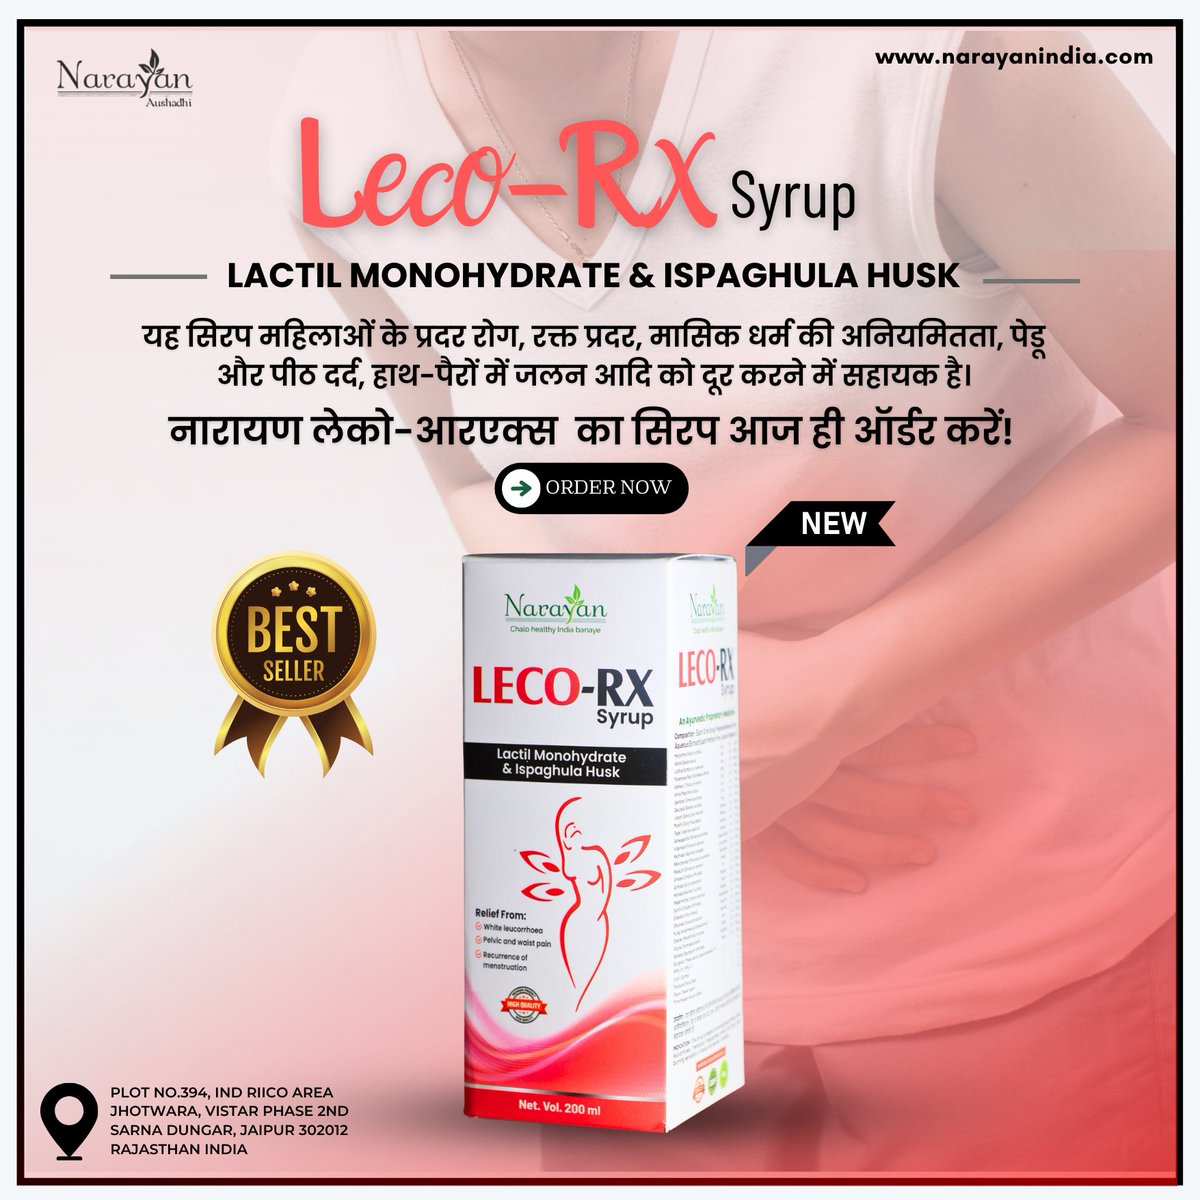 *Narayan Leco-Rx Syrup* is a gentle yet effective solution formulated specifically for women's health concerns. 

This herbal blend, containing Lactiol Monohydrate & Isabgol husk, helps address a range of issues:

*#NarayanLecoRx #WomensHealth #Leucorrhoea #MenstrualHealth